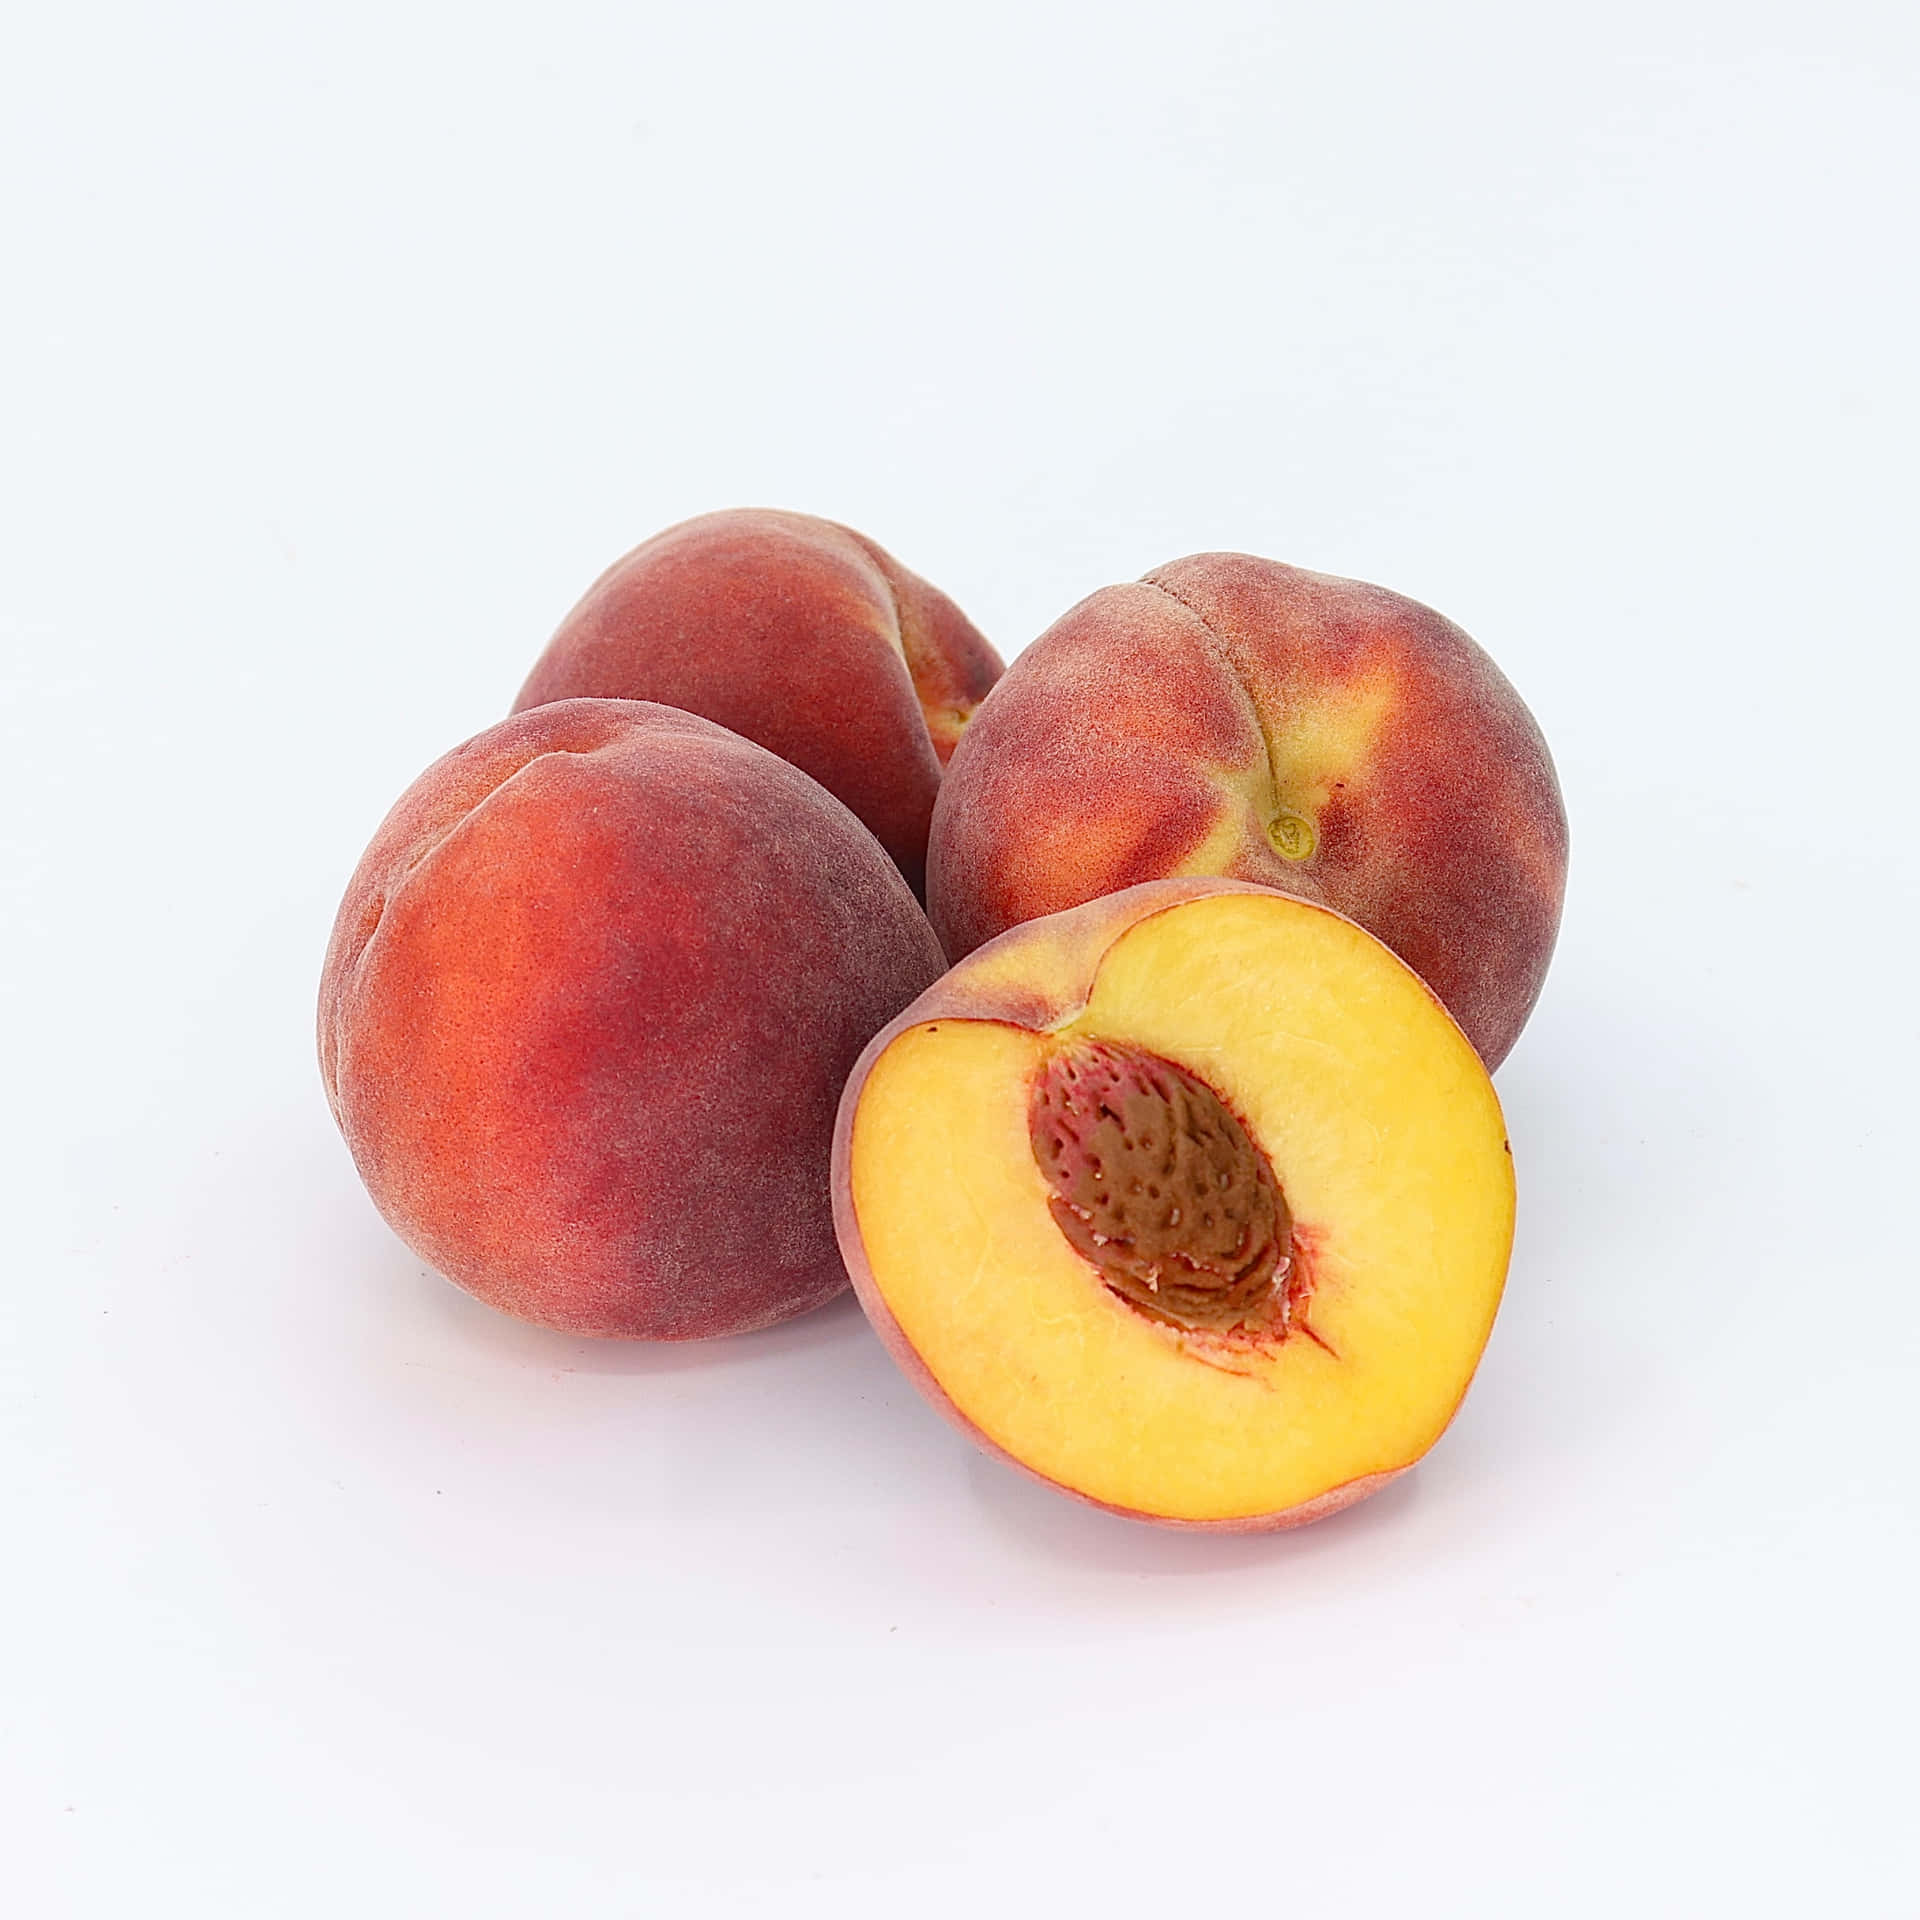 A juicy&delicious ripe peach, ready to be eaten